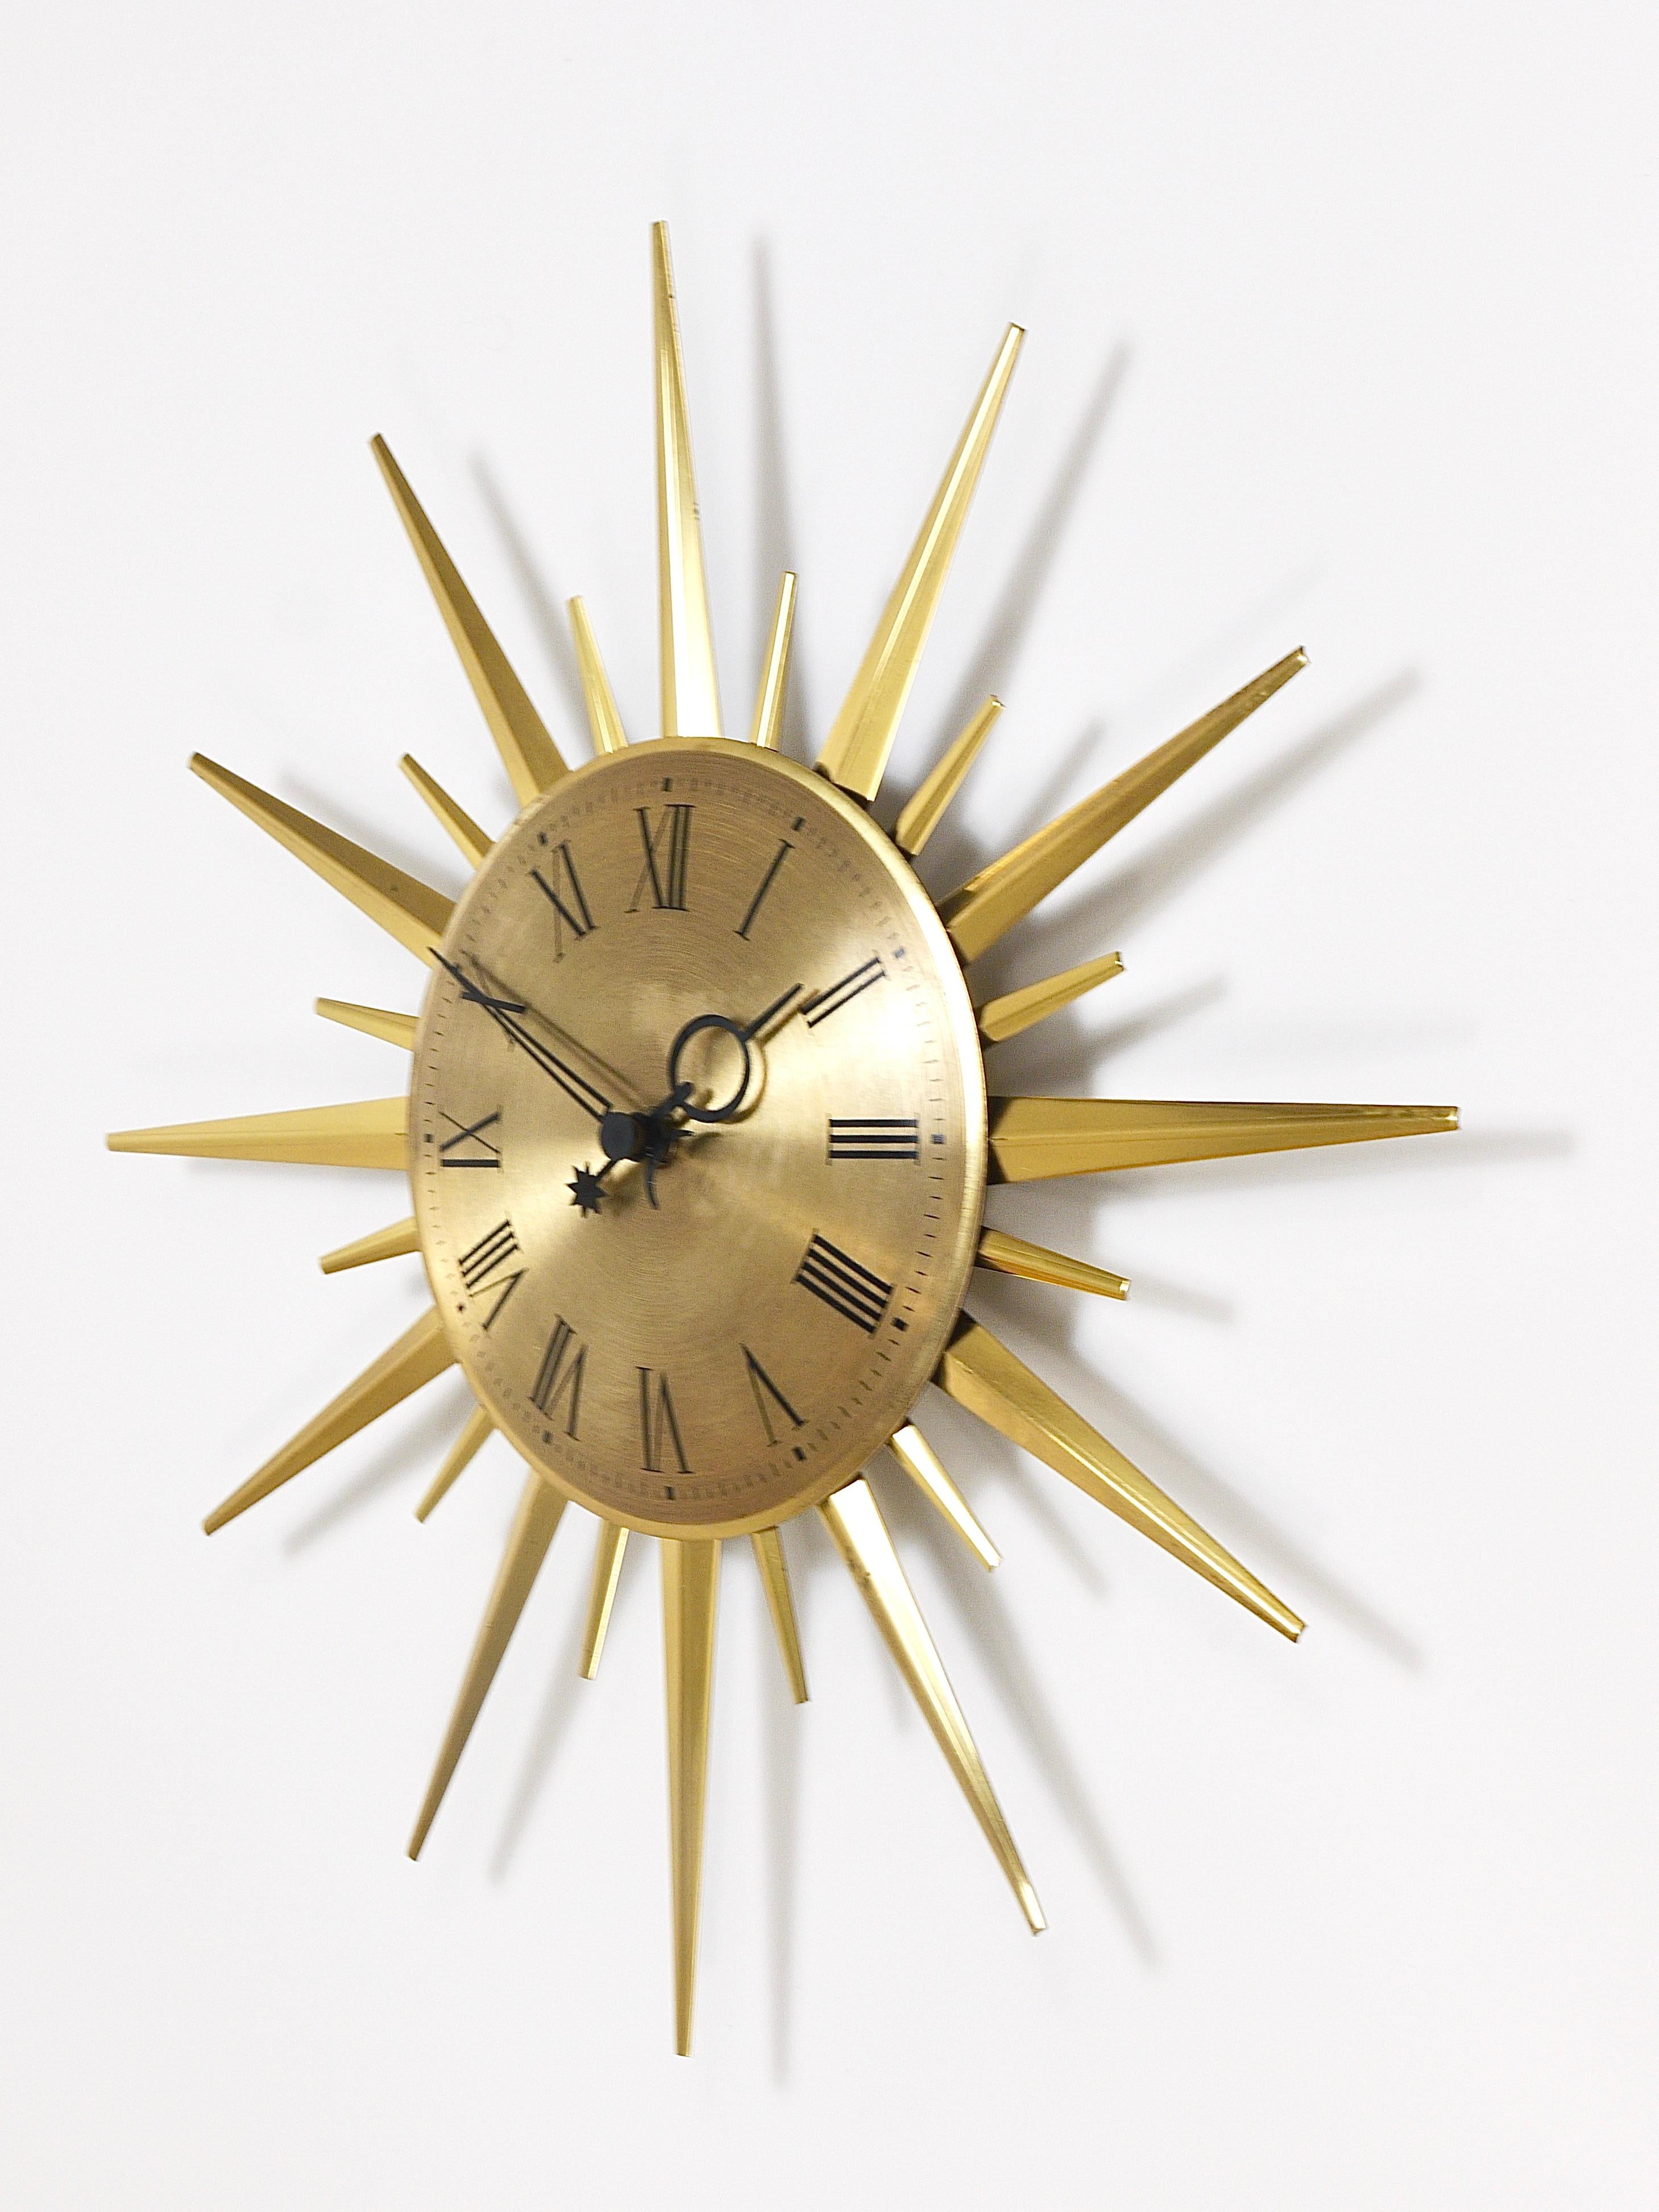 A round Atomic Starburst Hollywood Regency wall clock from the 1960s, executed by Junghans Germany. The clock has a beautiful golden brushed clocks face with nice numbers and hands and its spikes are made of polished brass.This vintage modernist